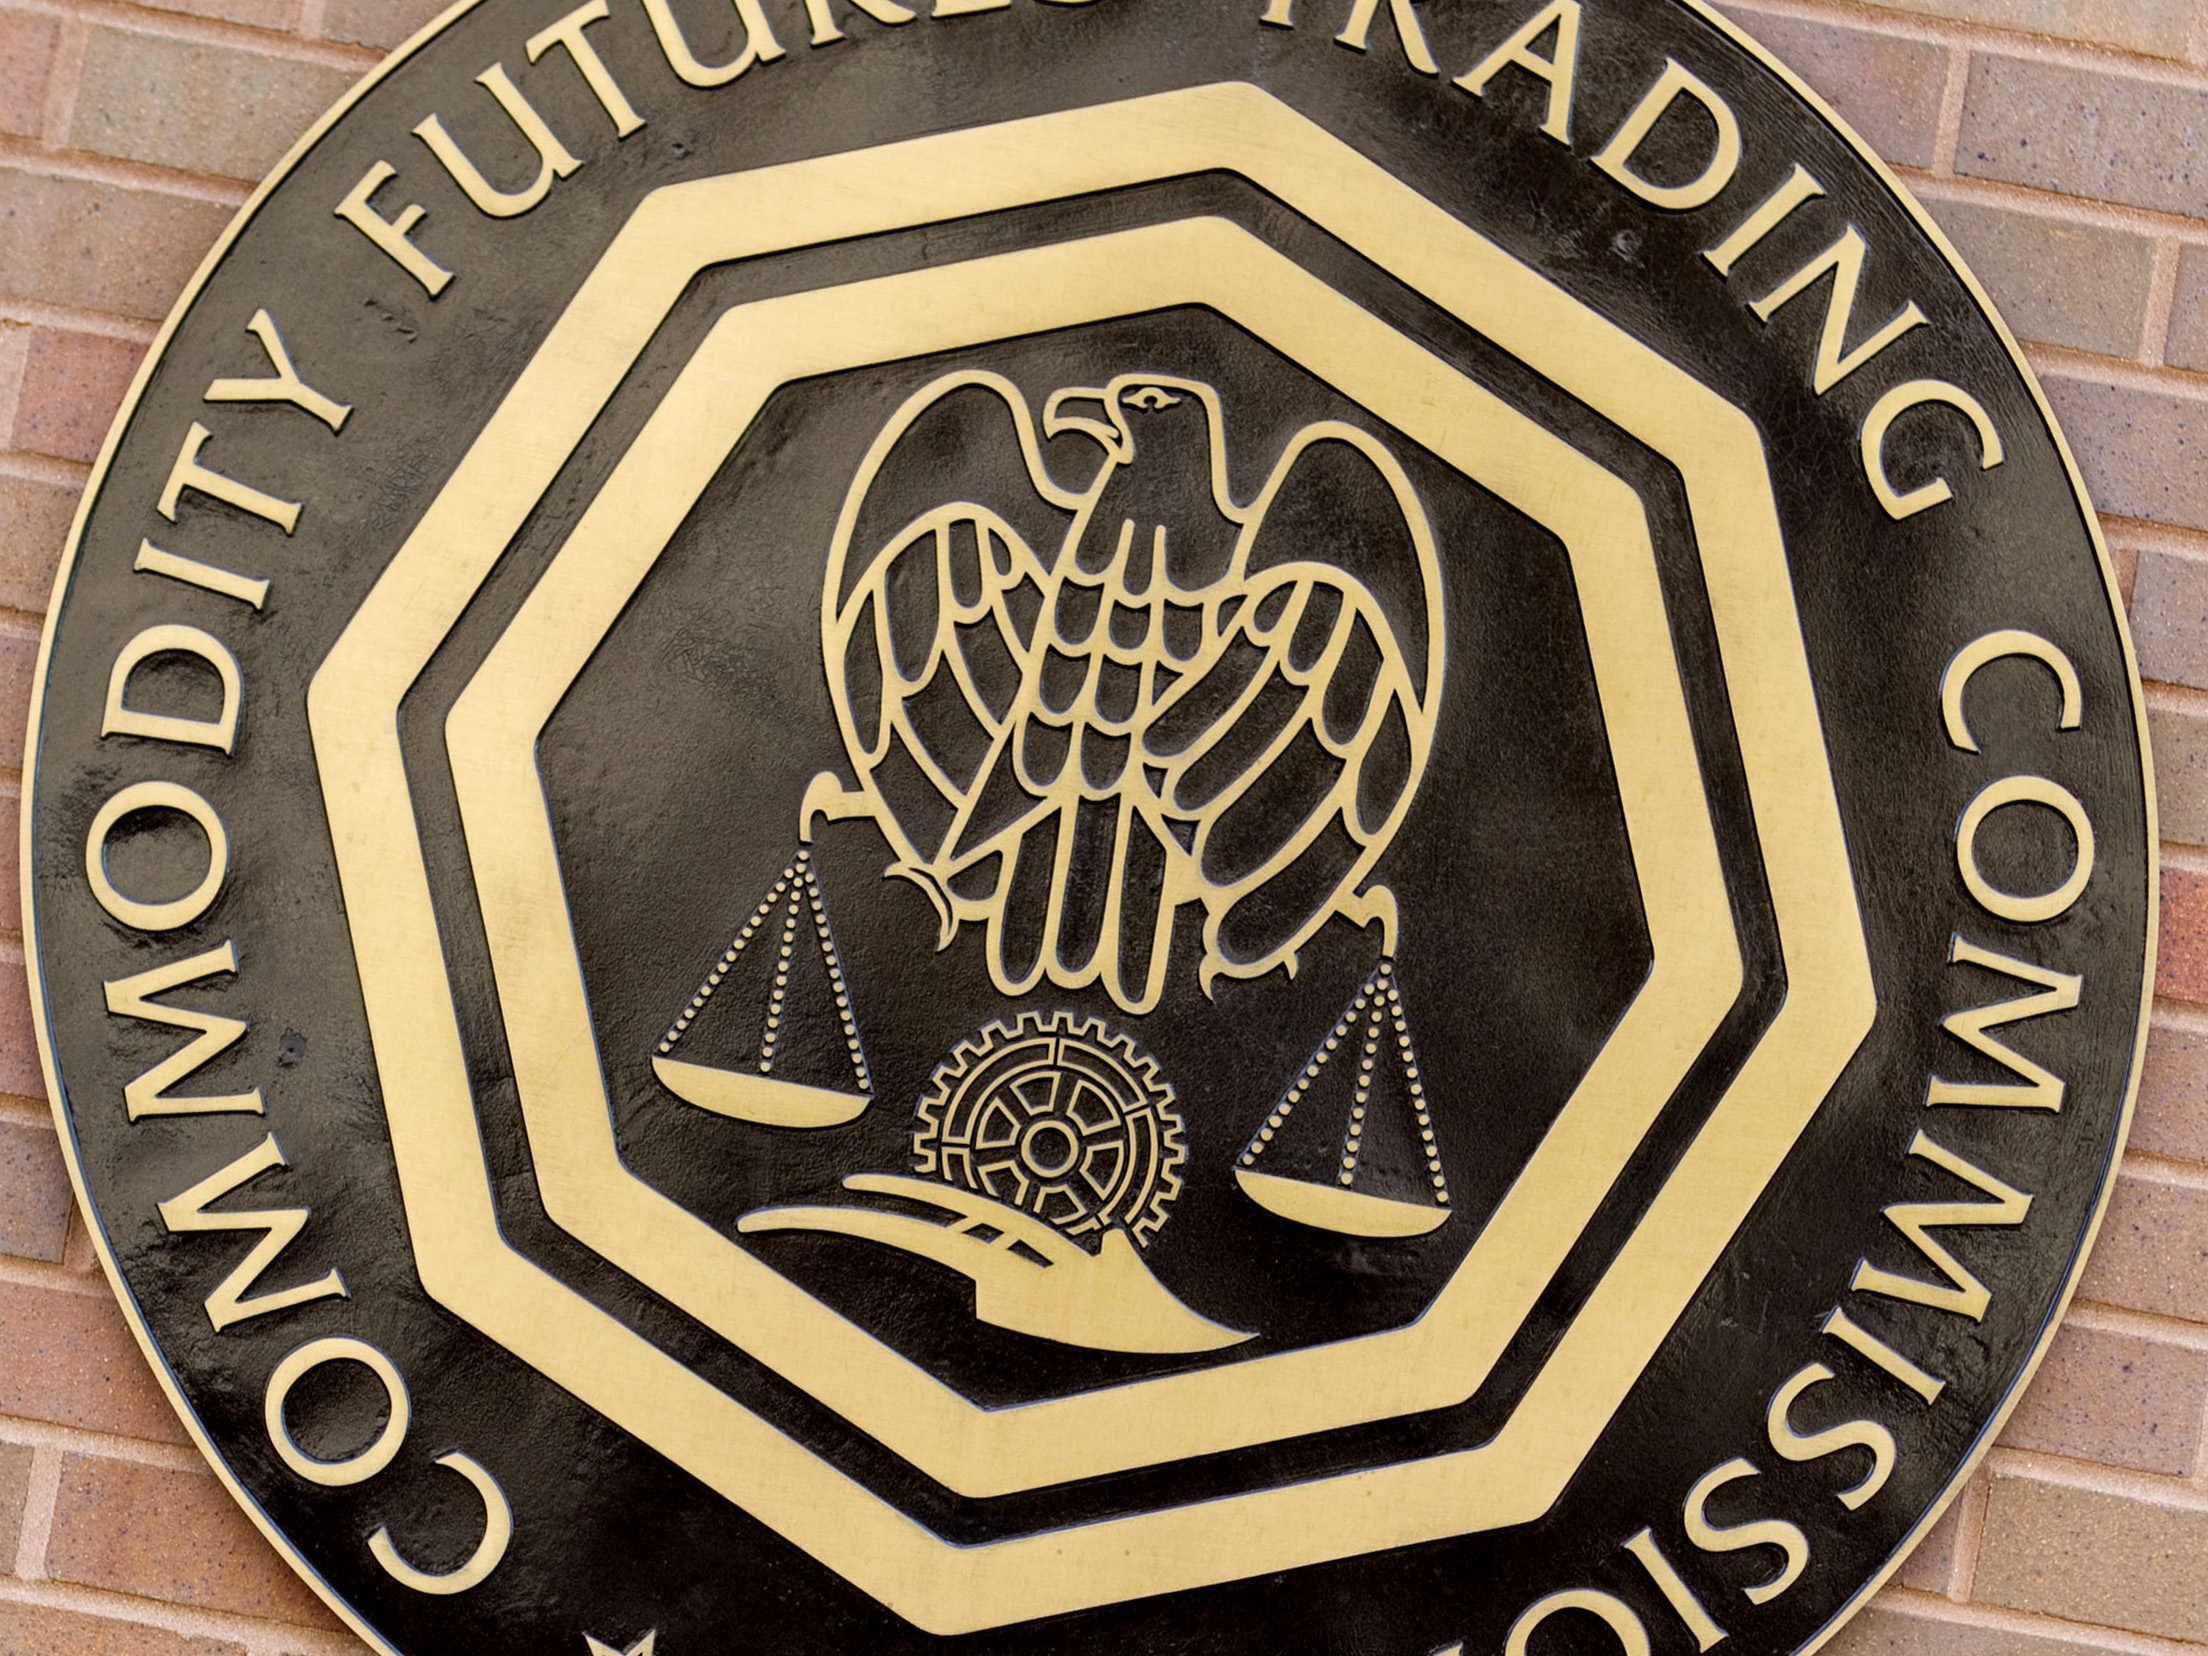 The Commodity Futures Trading Commission logo hangs outside their headquarters in Washington, D.C.